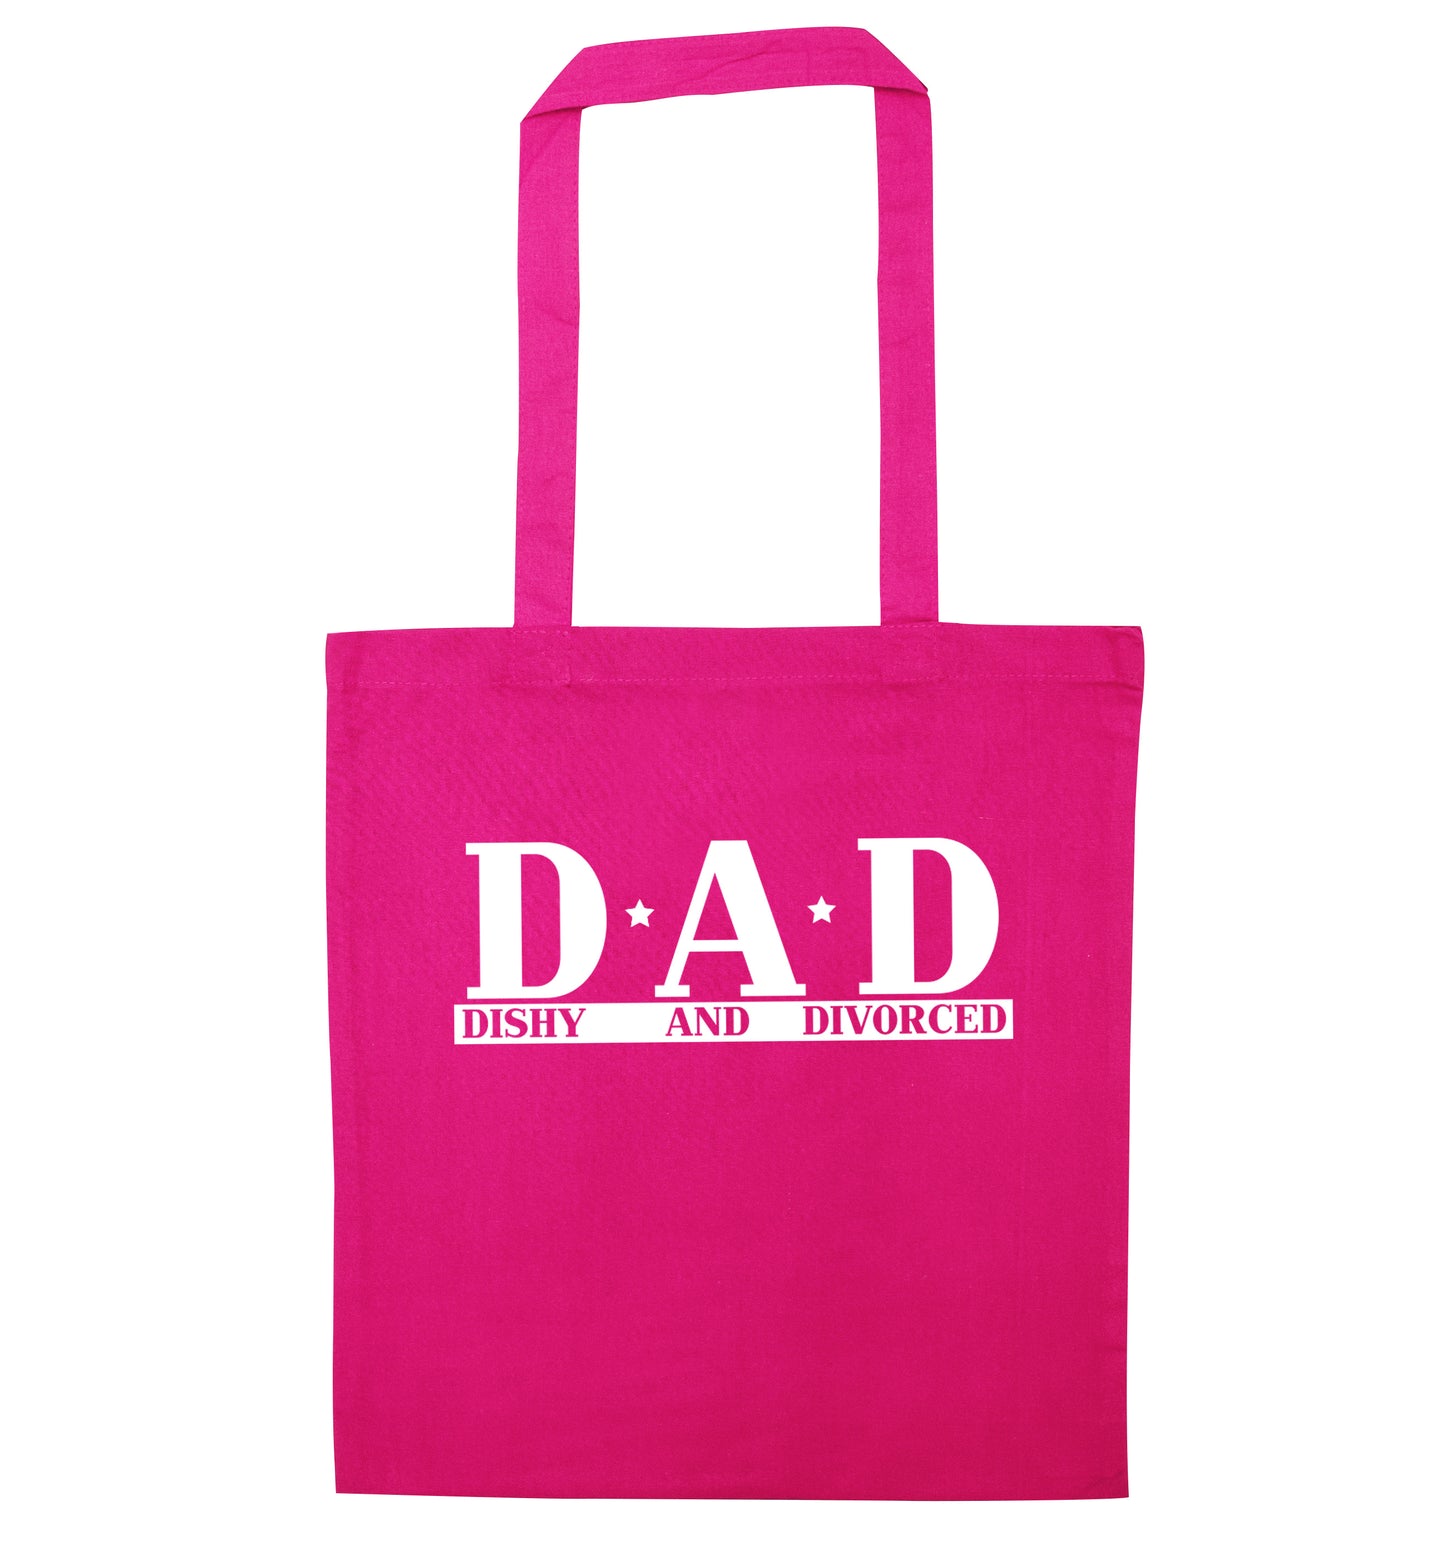 D.A.D meaning Dishy and Divorced pink tote bag